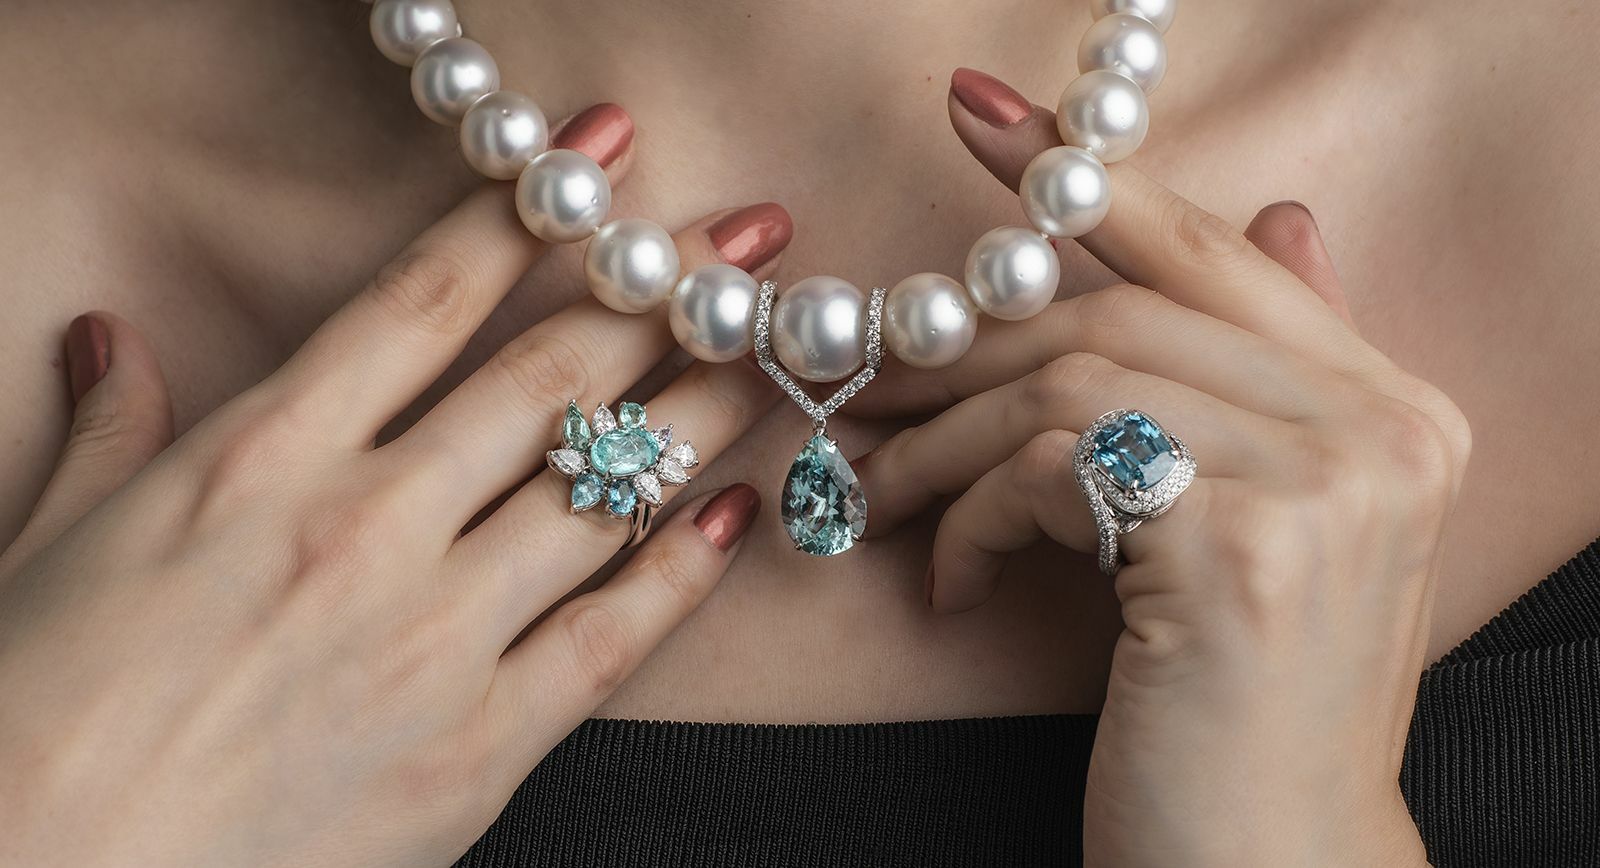 Yuli Jewellery rings and a pearl necklace with gemstones